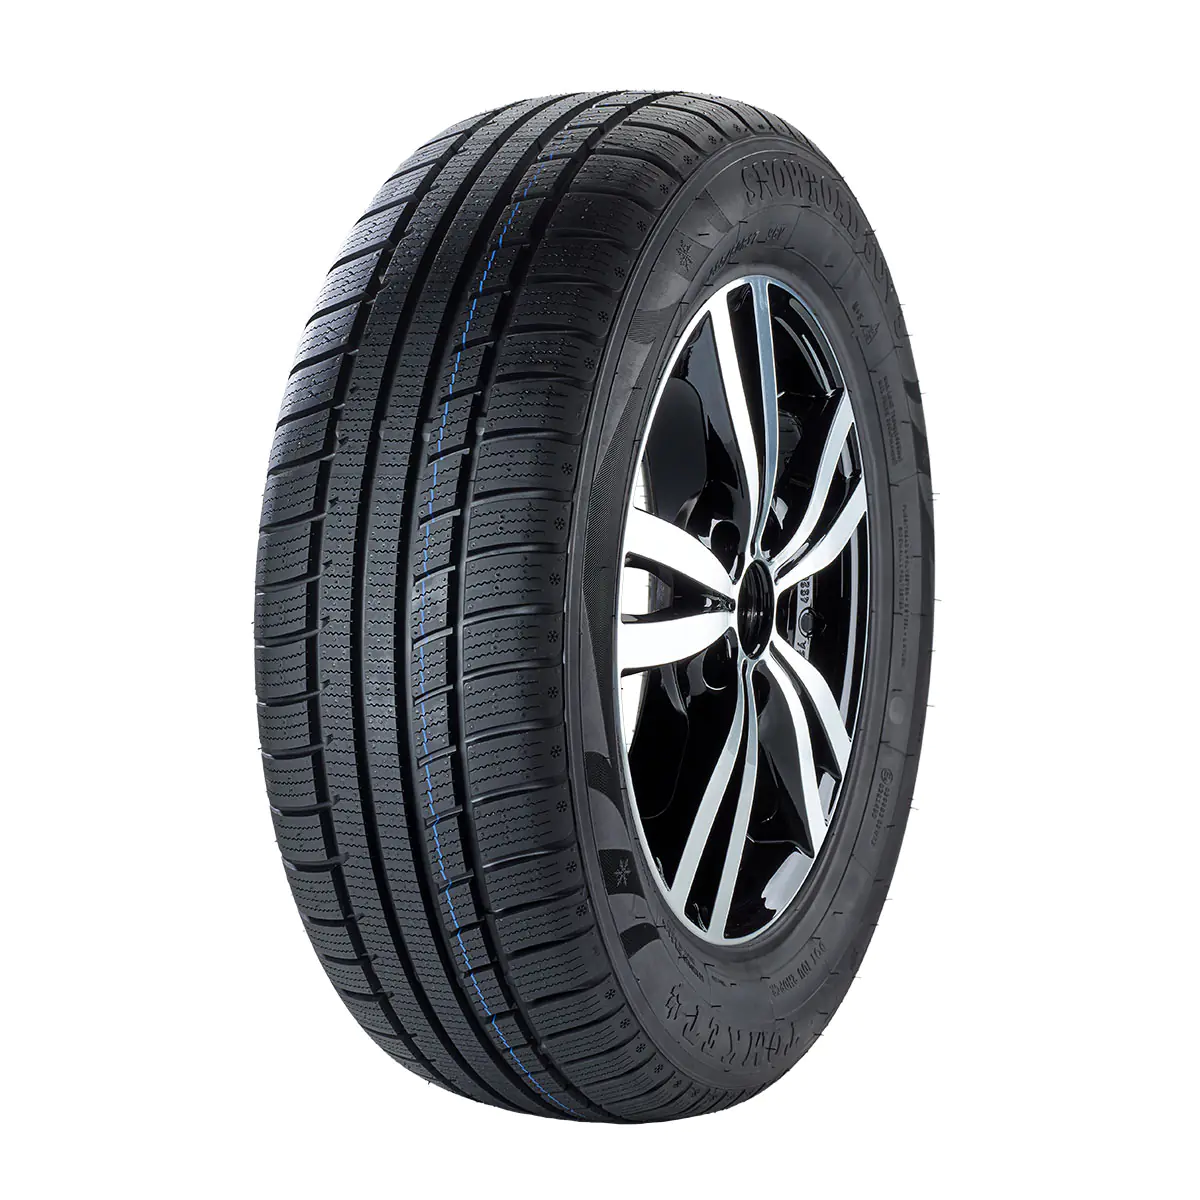 Gomme 4x4 Suv Tomket 235/55 R18 104H SNOWROAD SUV 3 XL M+S Invernale